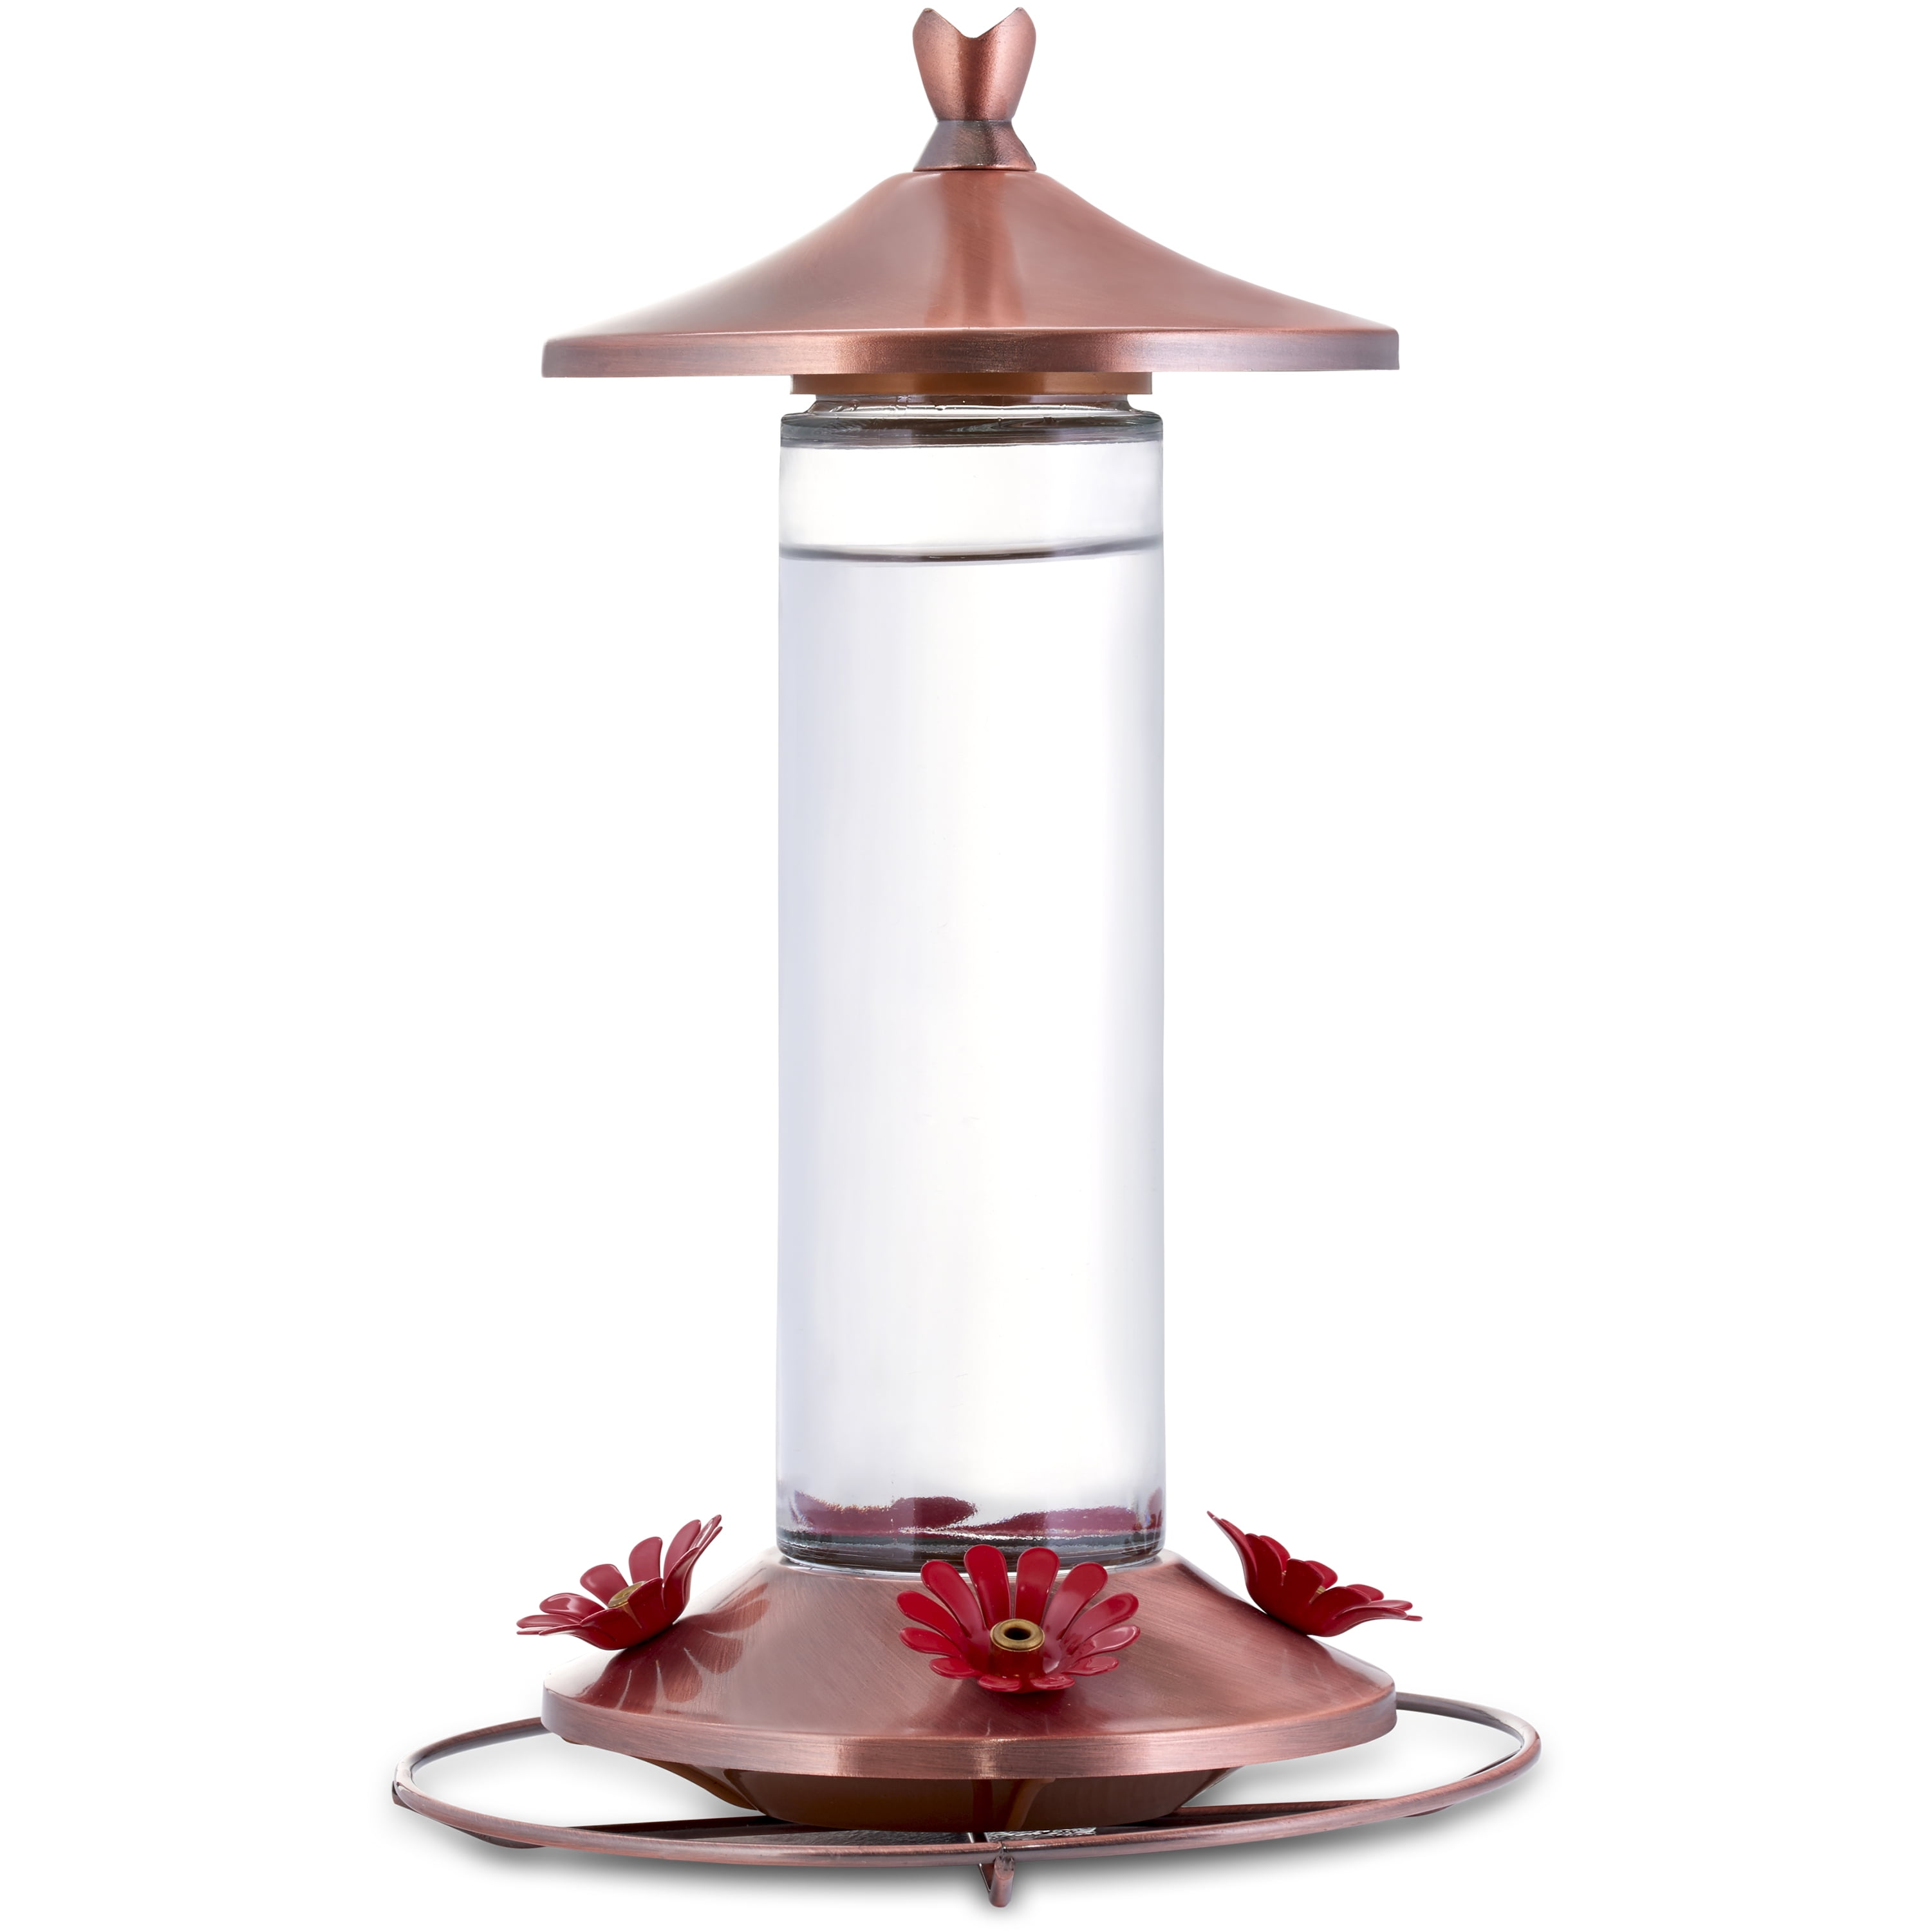 Four Station SWEET FEEDERS Window Hummingbird Feeder Handcrafted Copper Hummingbird Feeder Modern Hummingbird Feeder Multiple Station Home Décor Copper Feeder Glass Bottle Suction Cup 